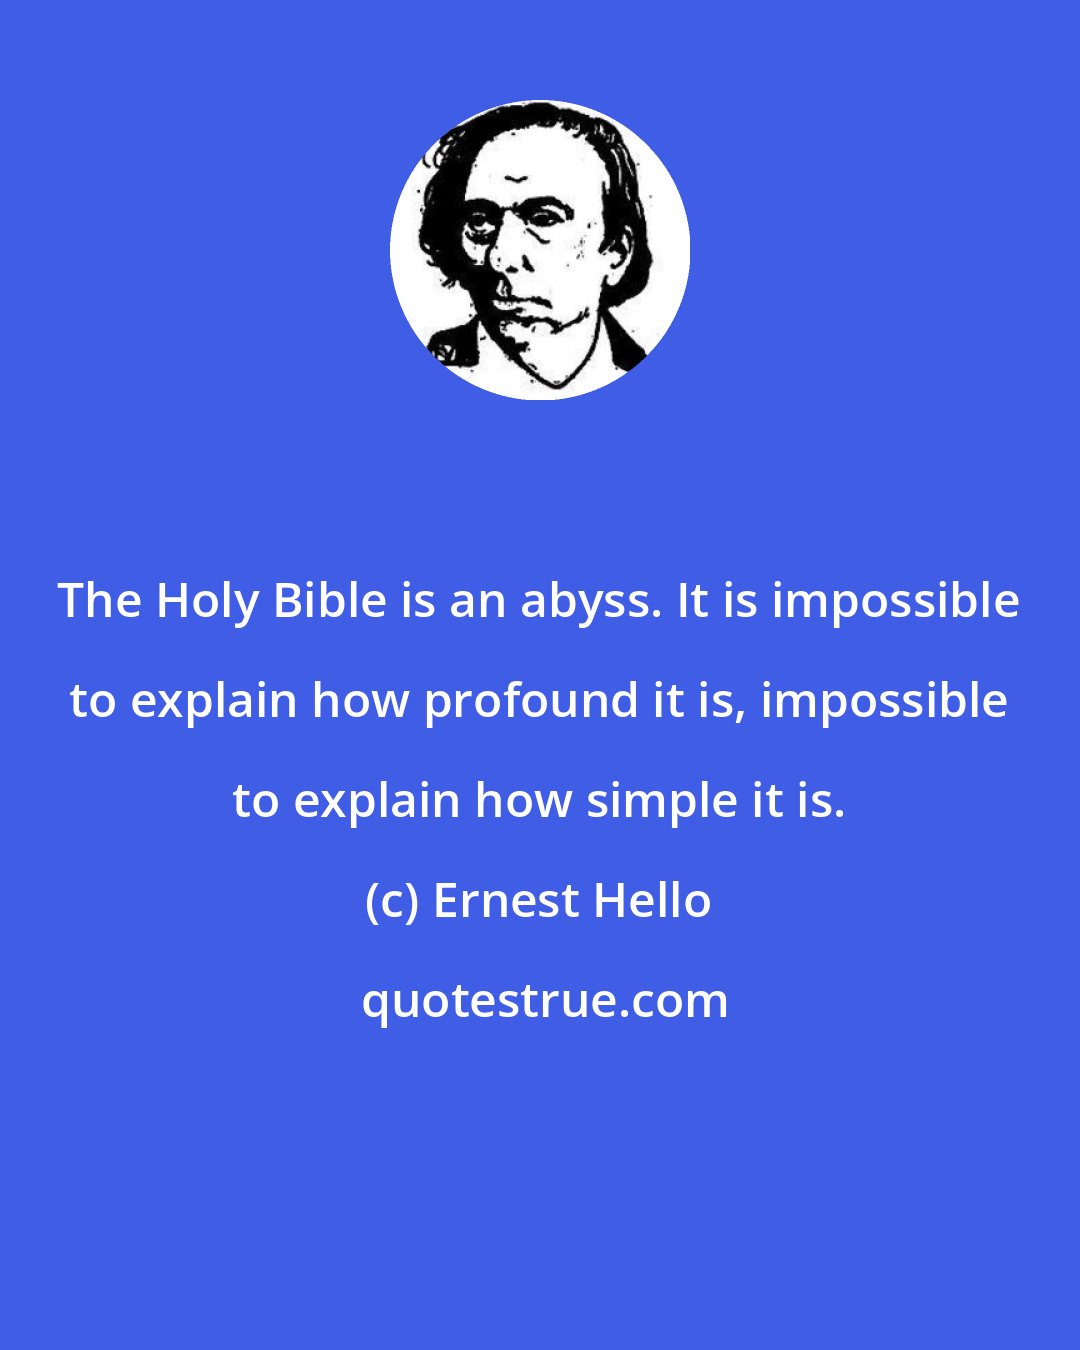 Ernest Hello: The Holy Bible is an abyss. It is impossible to explain how profound it is, impossible to explain how simple it is.